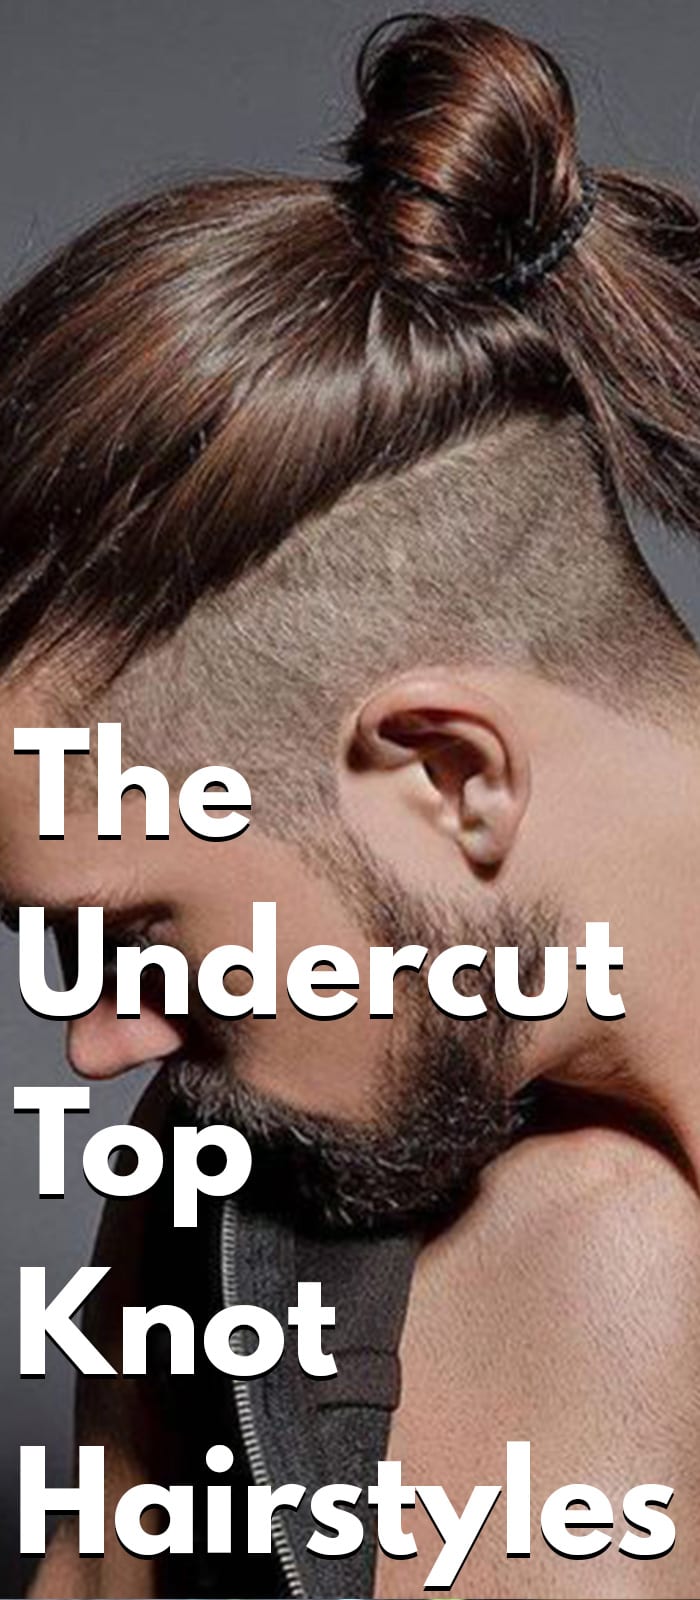 The Undercut Top Knot Hairstyle